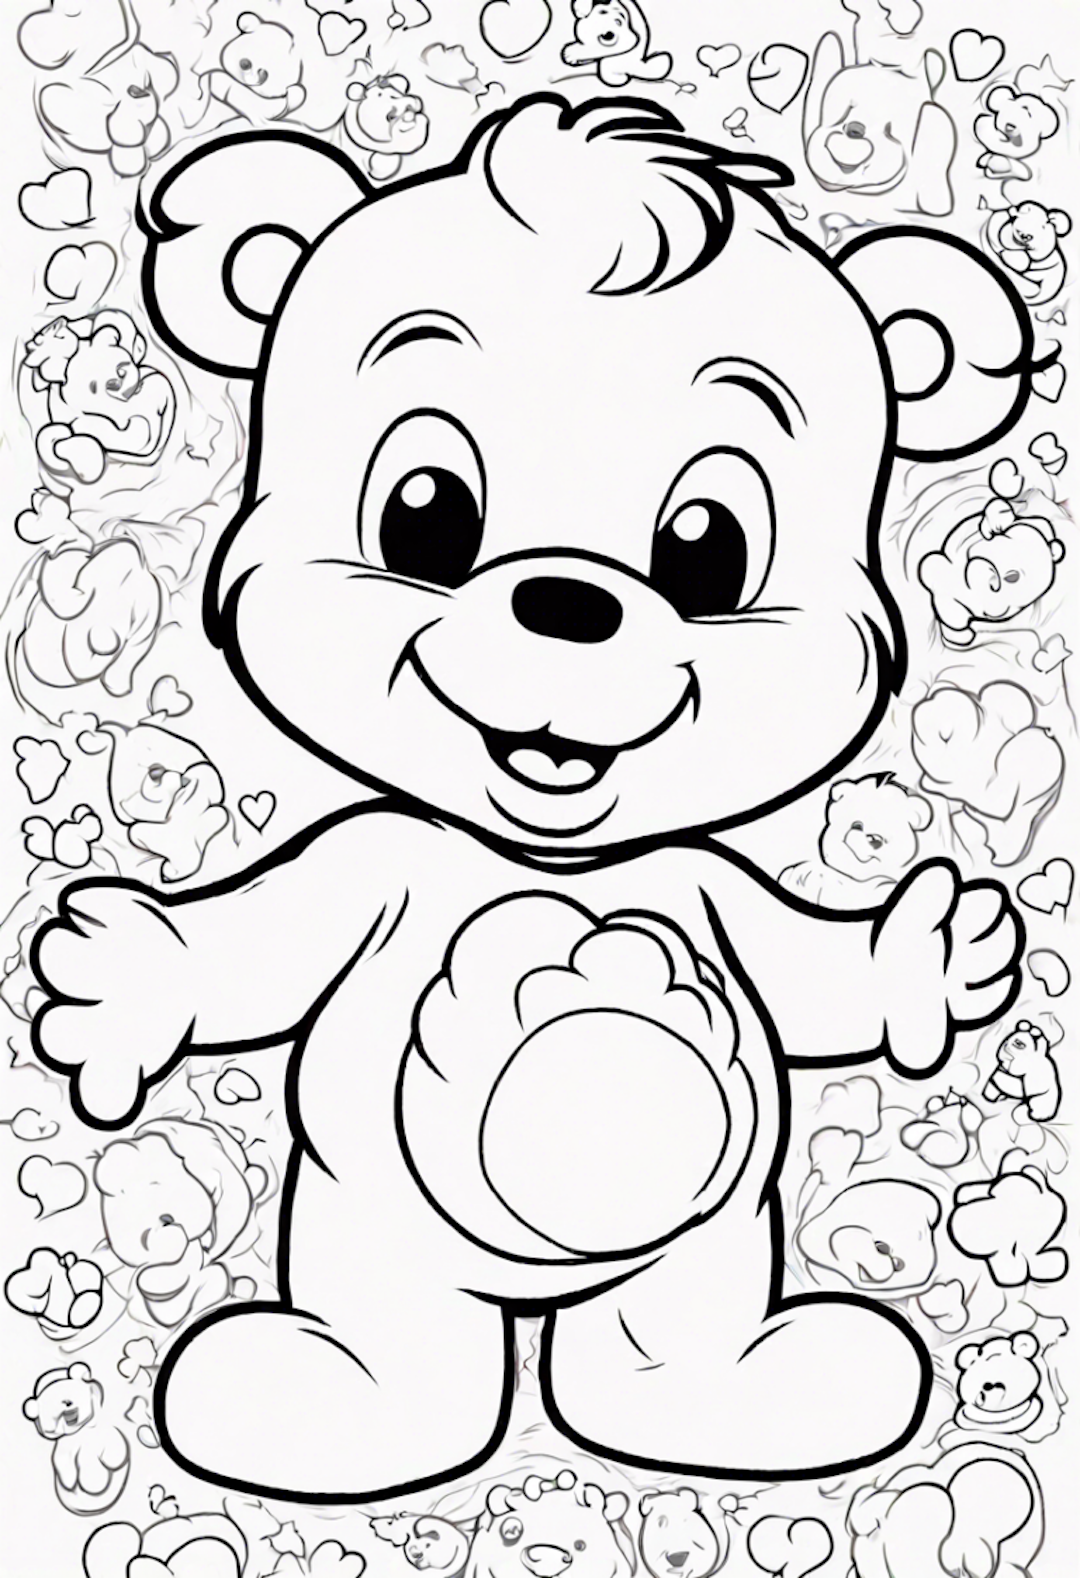 Care Bears Cheer Bear Smiles coloring pages